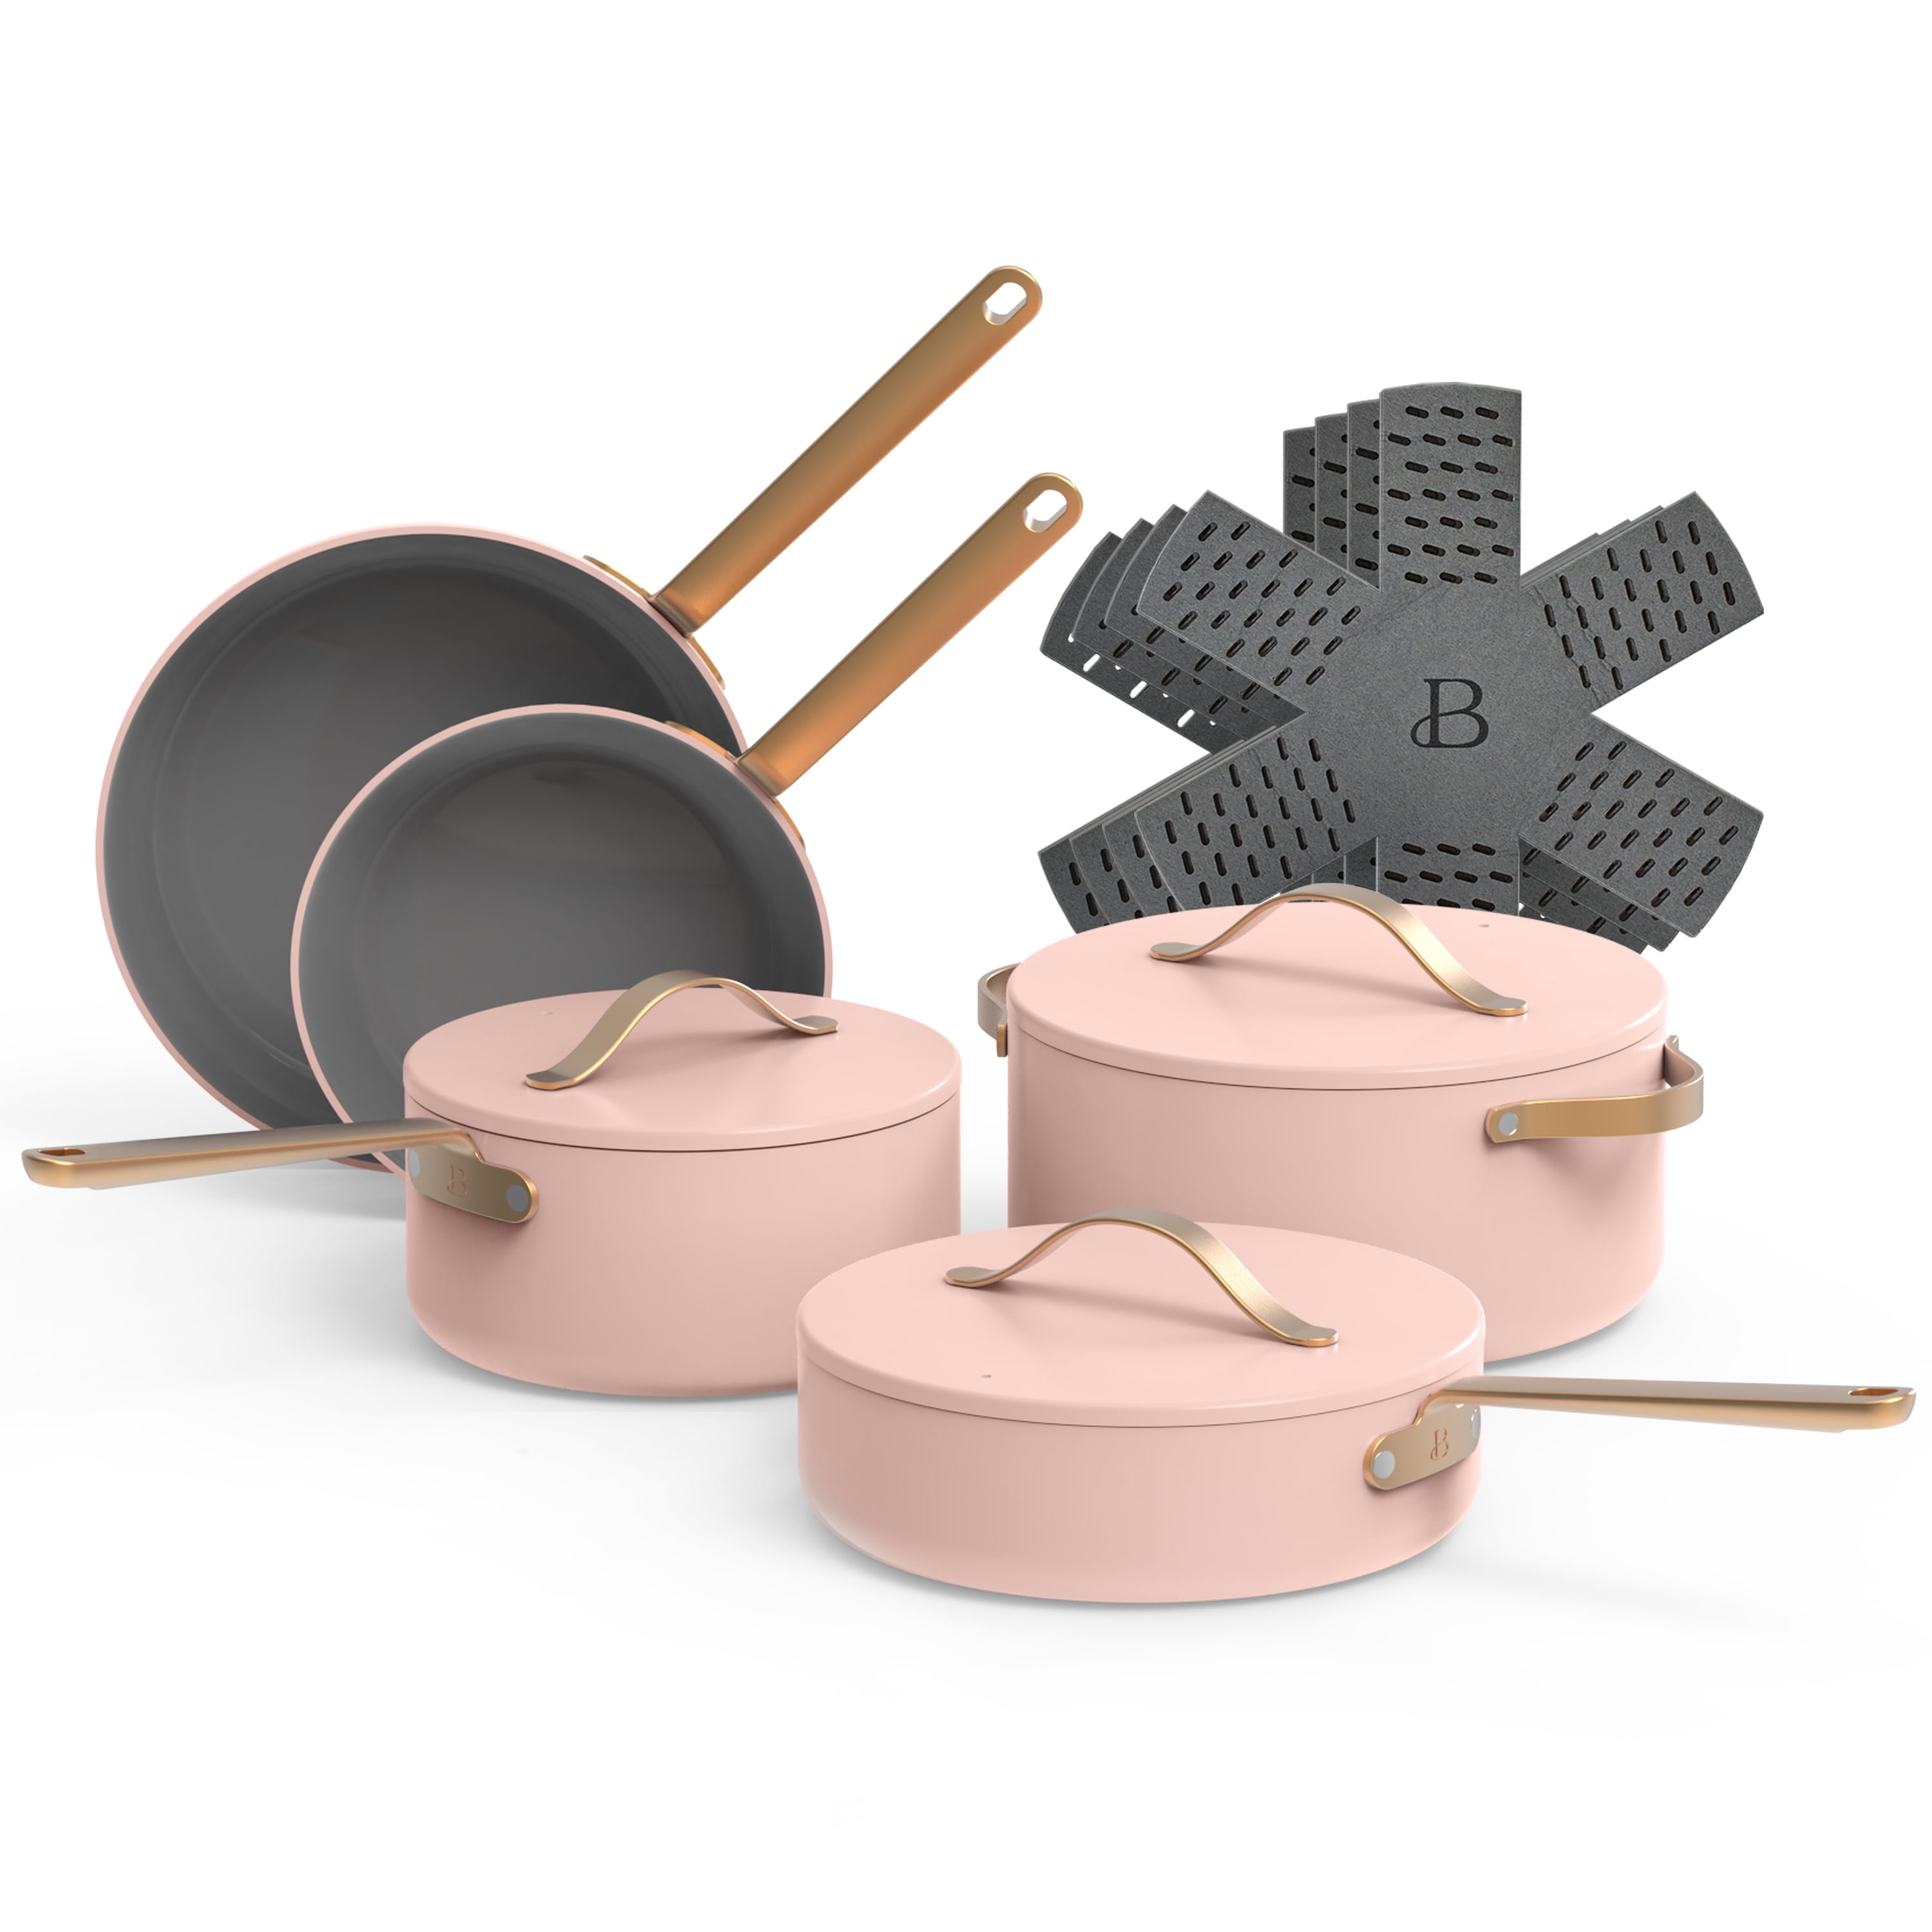 Beautiful 12pc Ceramic Non-Stick Cookware Set, Rose by Drew Barrymore